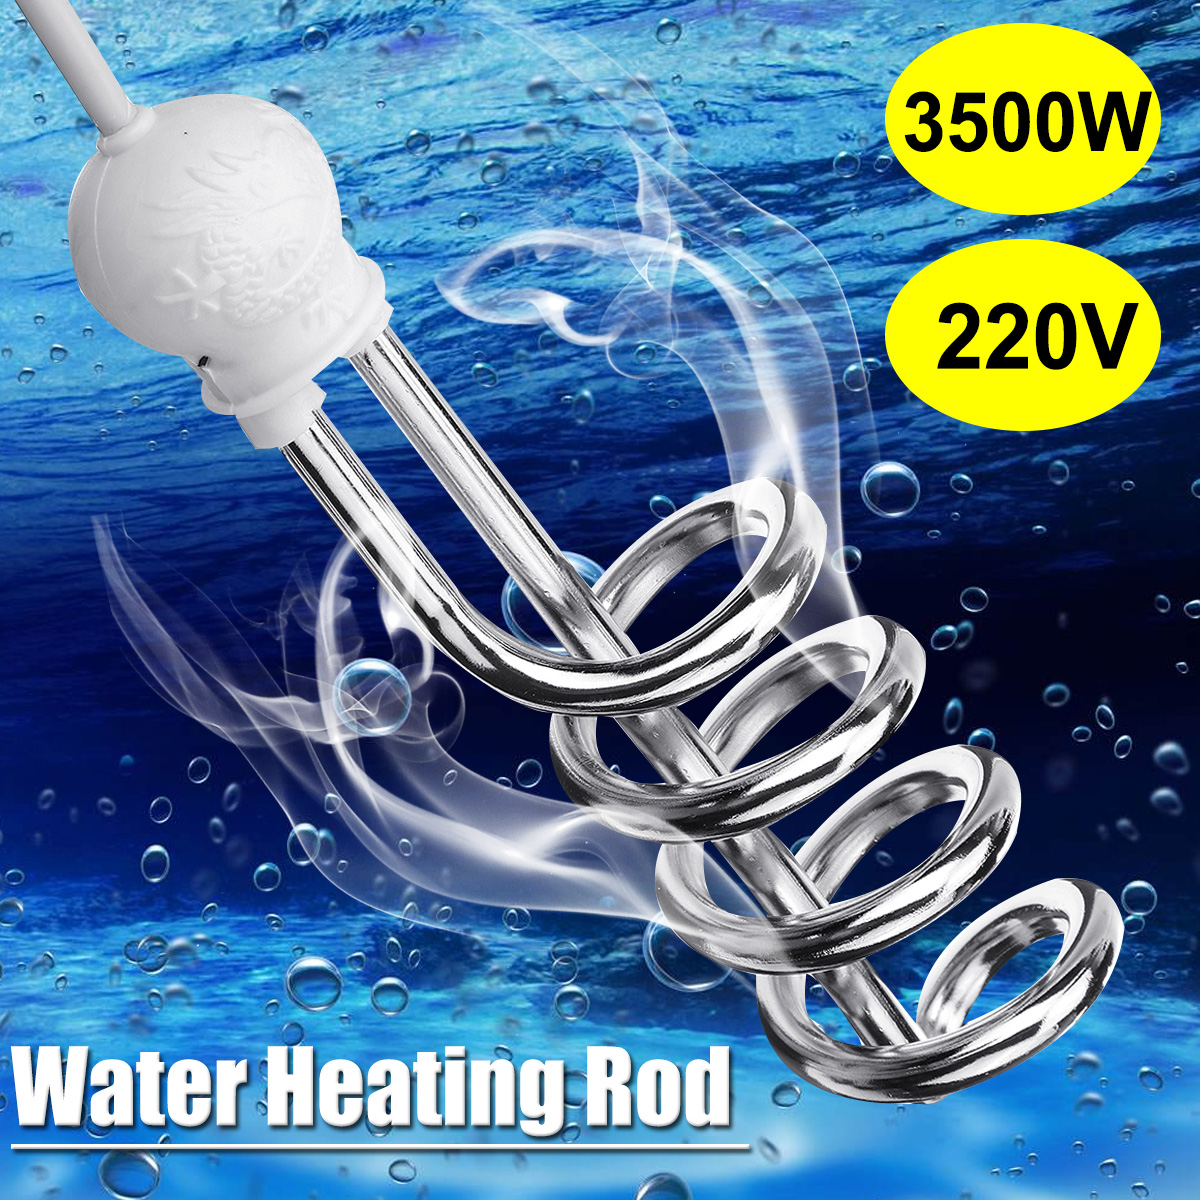 K858-3000W-Hot-Water-Heater-Safe-Immersion-Element-Boiler-for-Bath-Tub-Pool-Stainless-Steel-Water-He-1704164-2